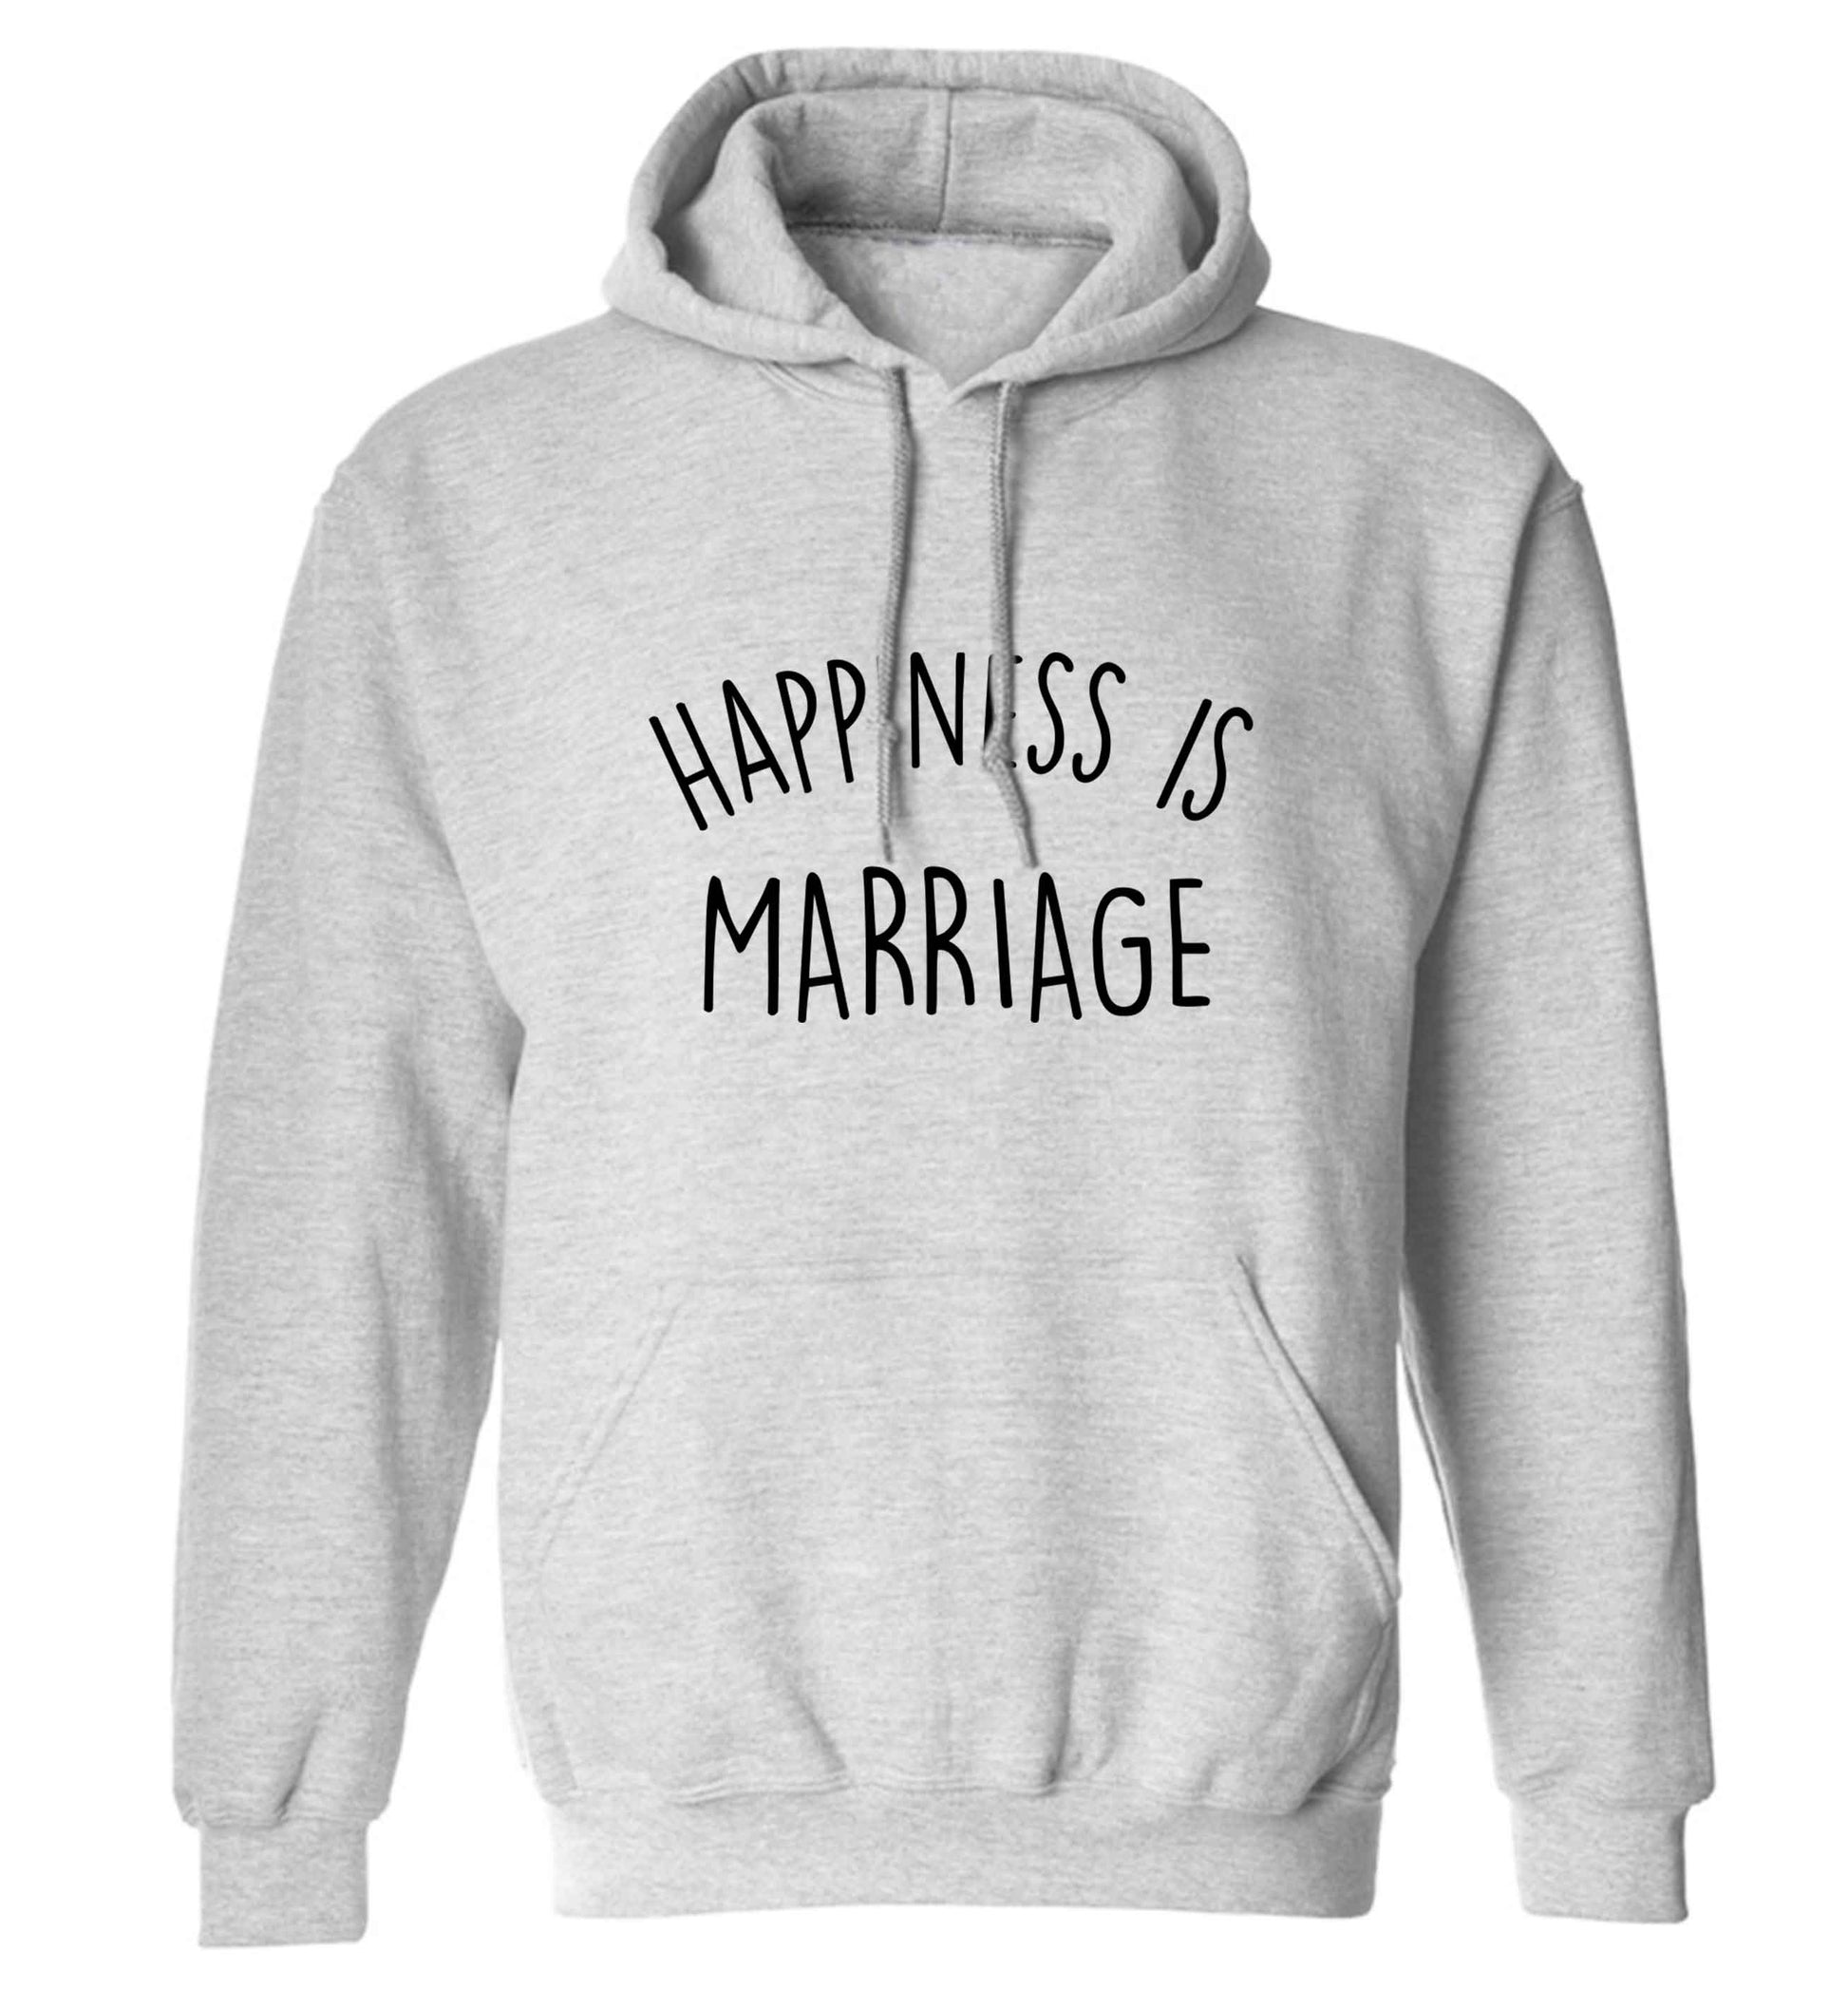 Happiness is wedding planning adults unisex grey hoodie 2XL